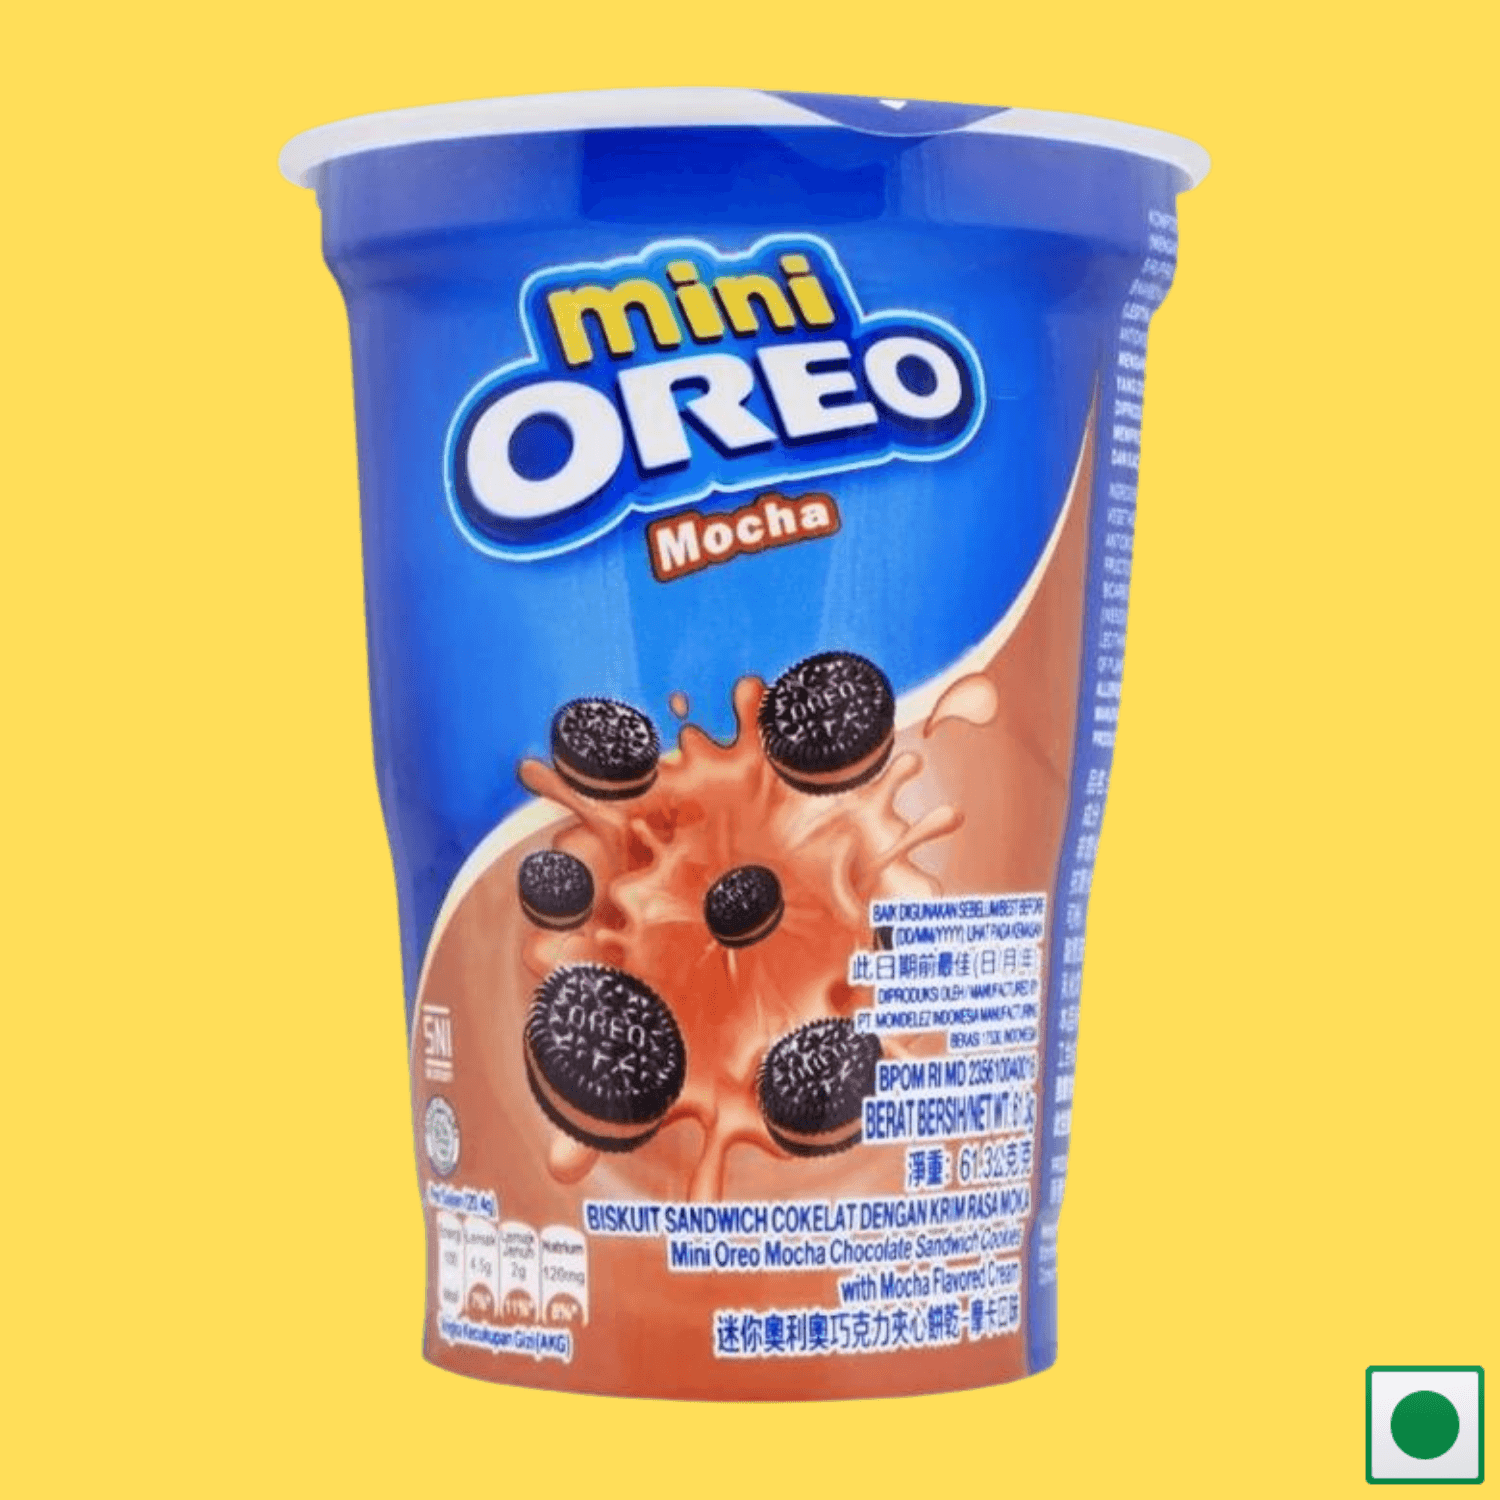 Oreo Mini Chocolate Flavored Biscuits 61.3g Imported